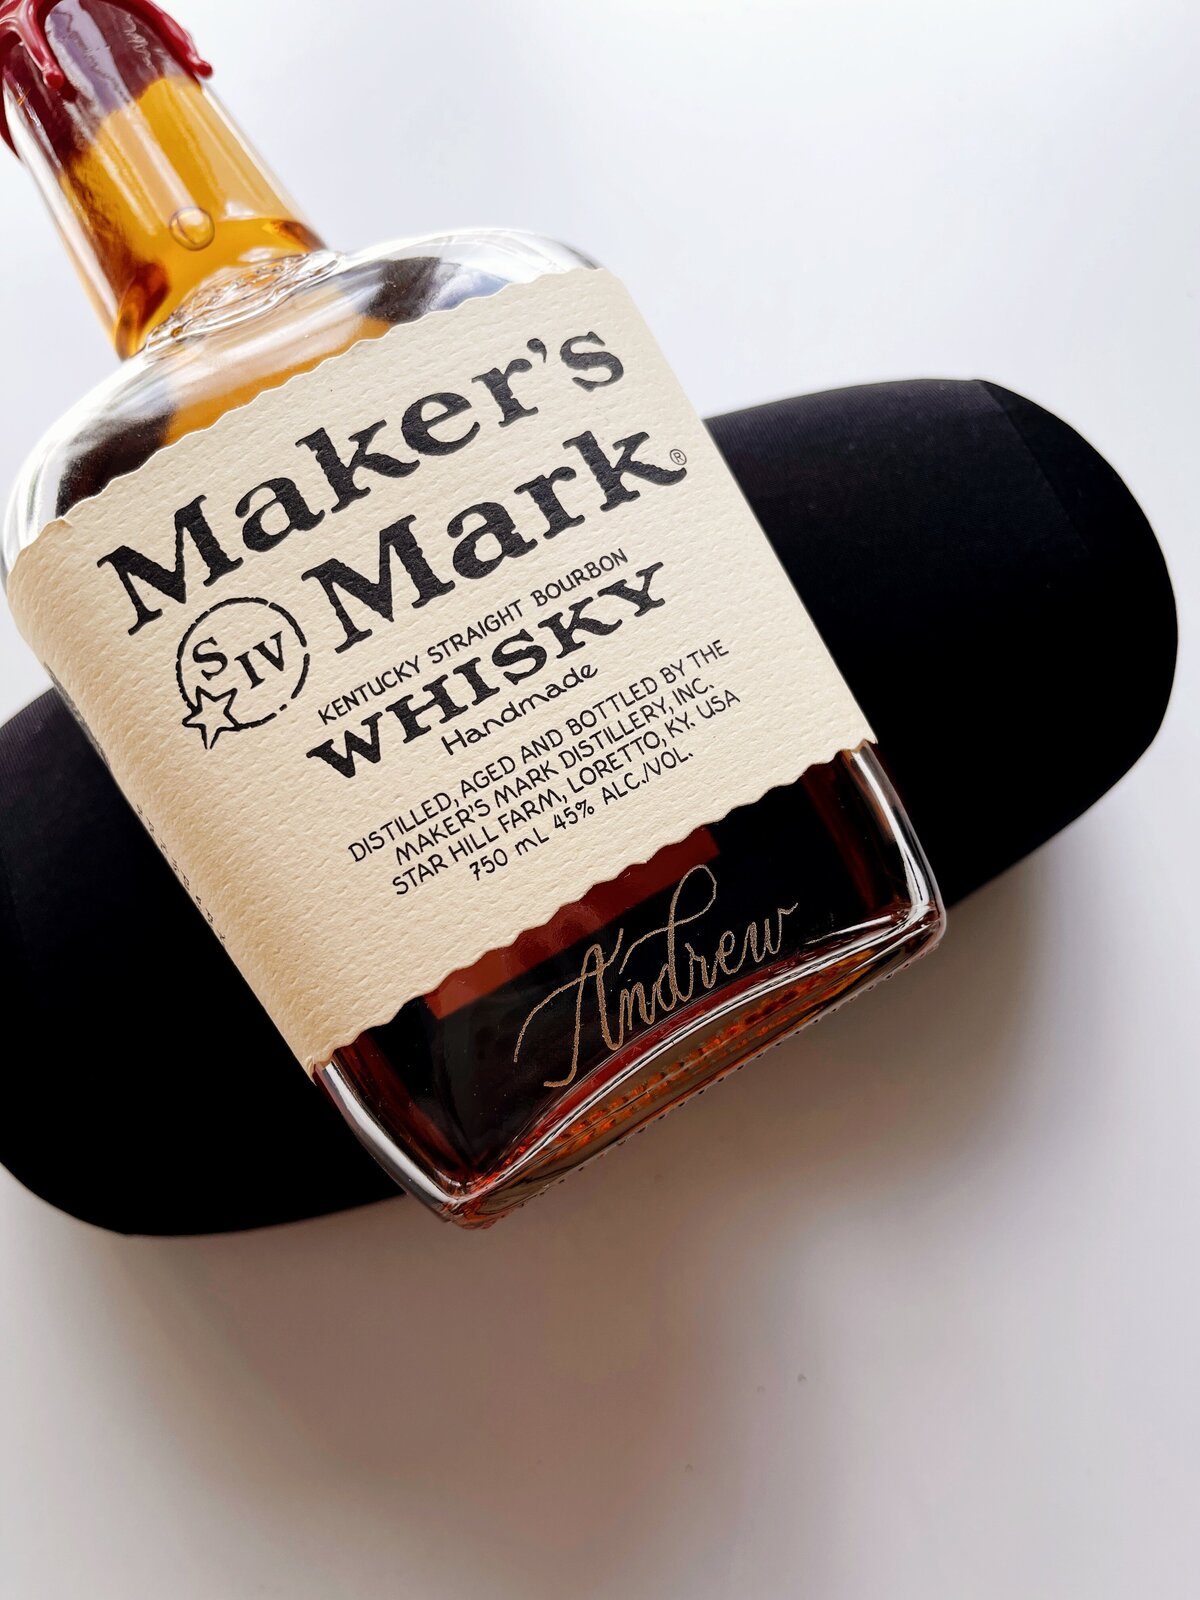 Makers Mark Bottle Engraving with Calligraphy in Cleveland, Ohio